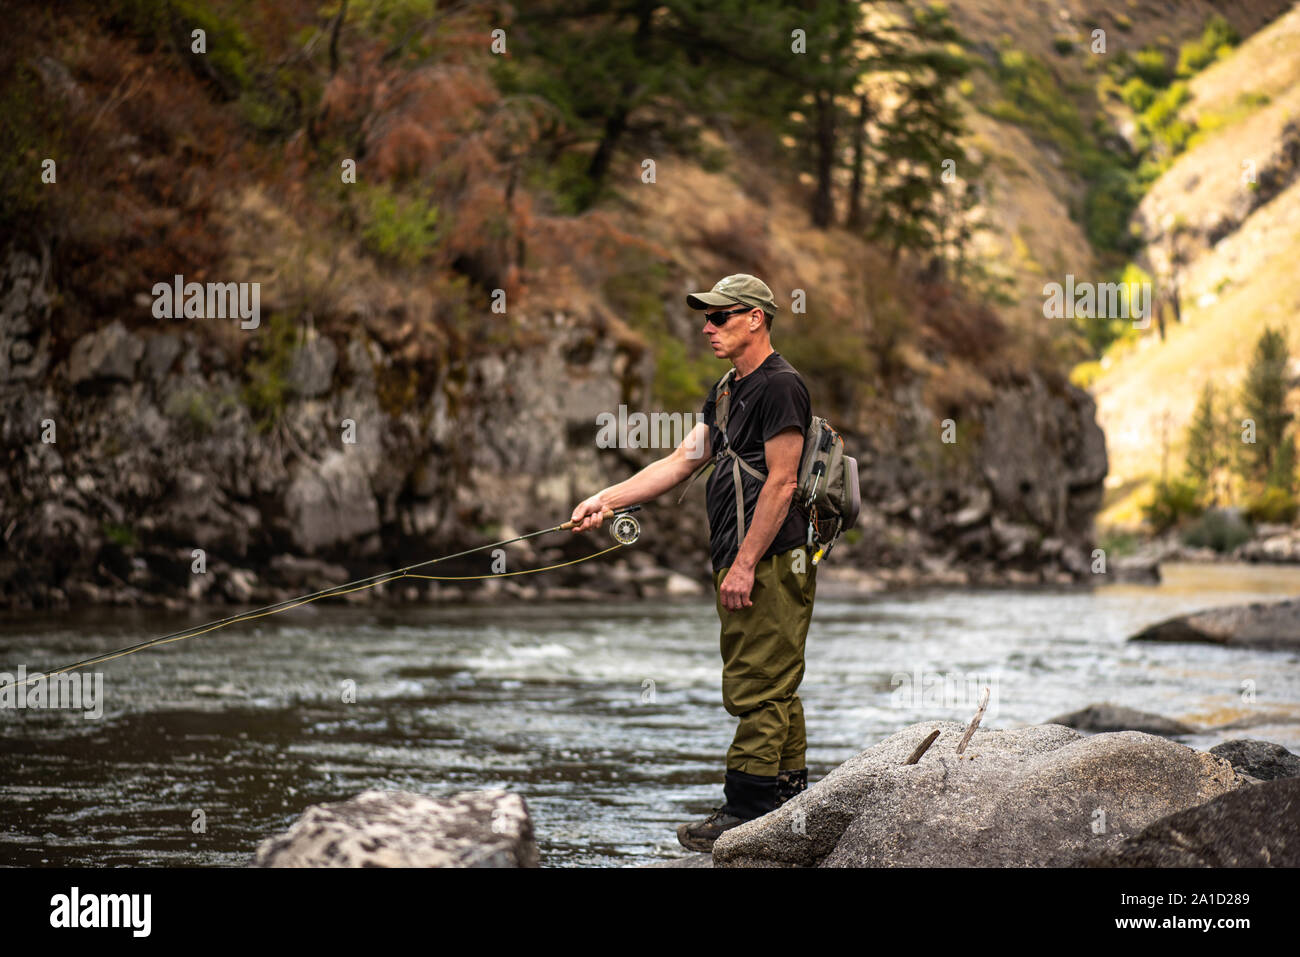 Fly fisherman casting in the mountain stream. Stock Photo